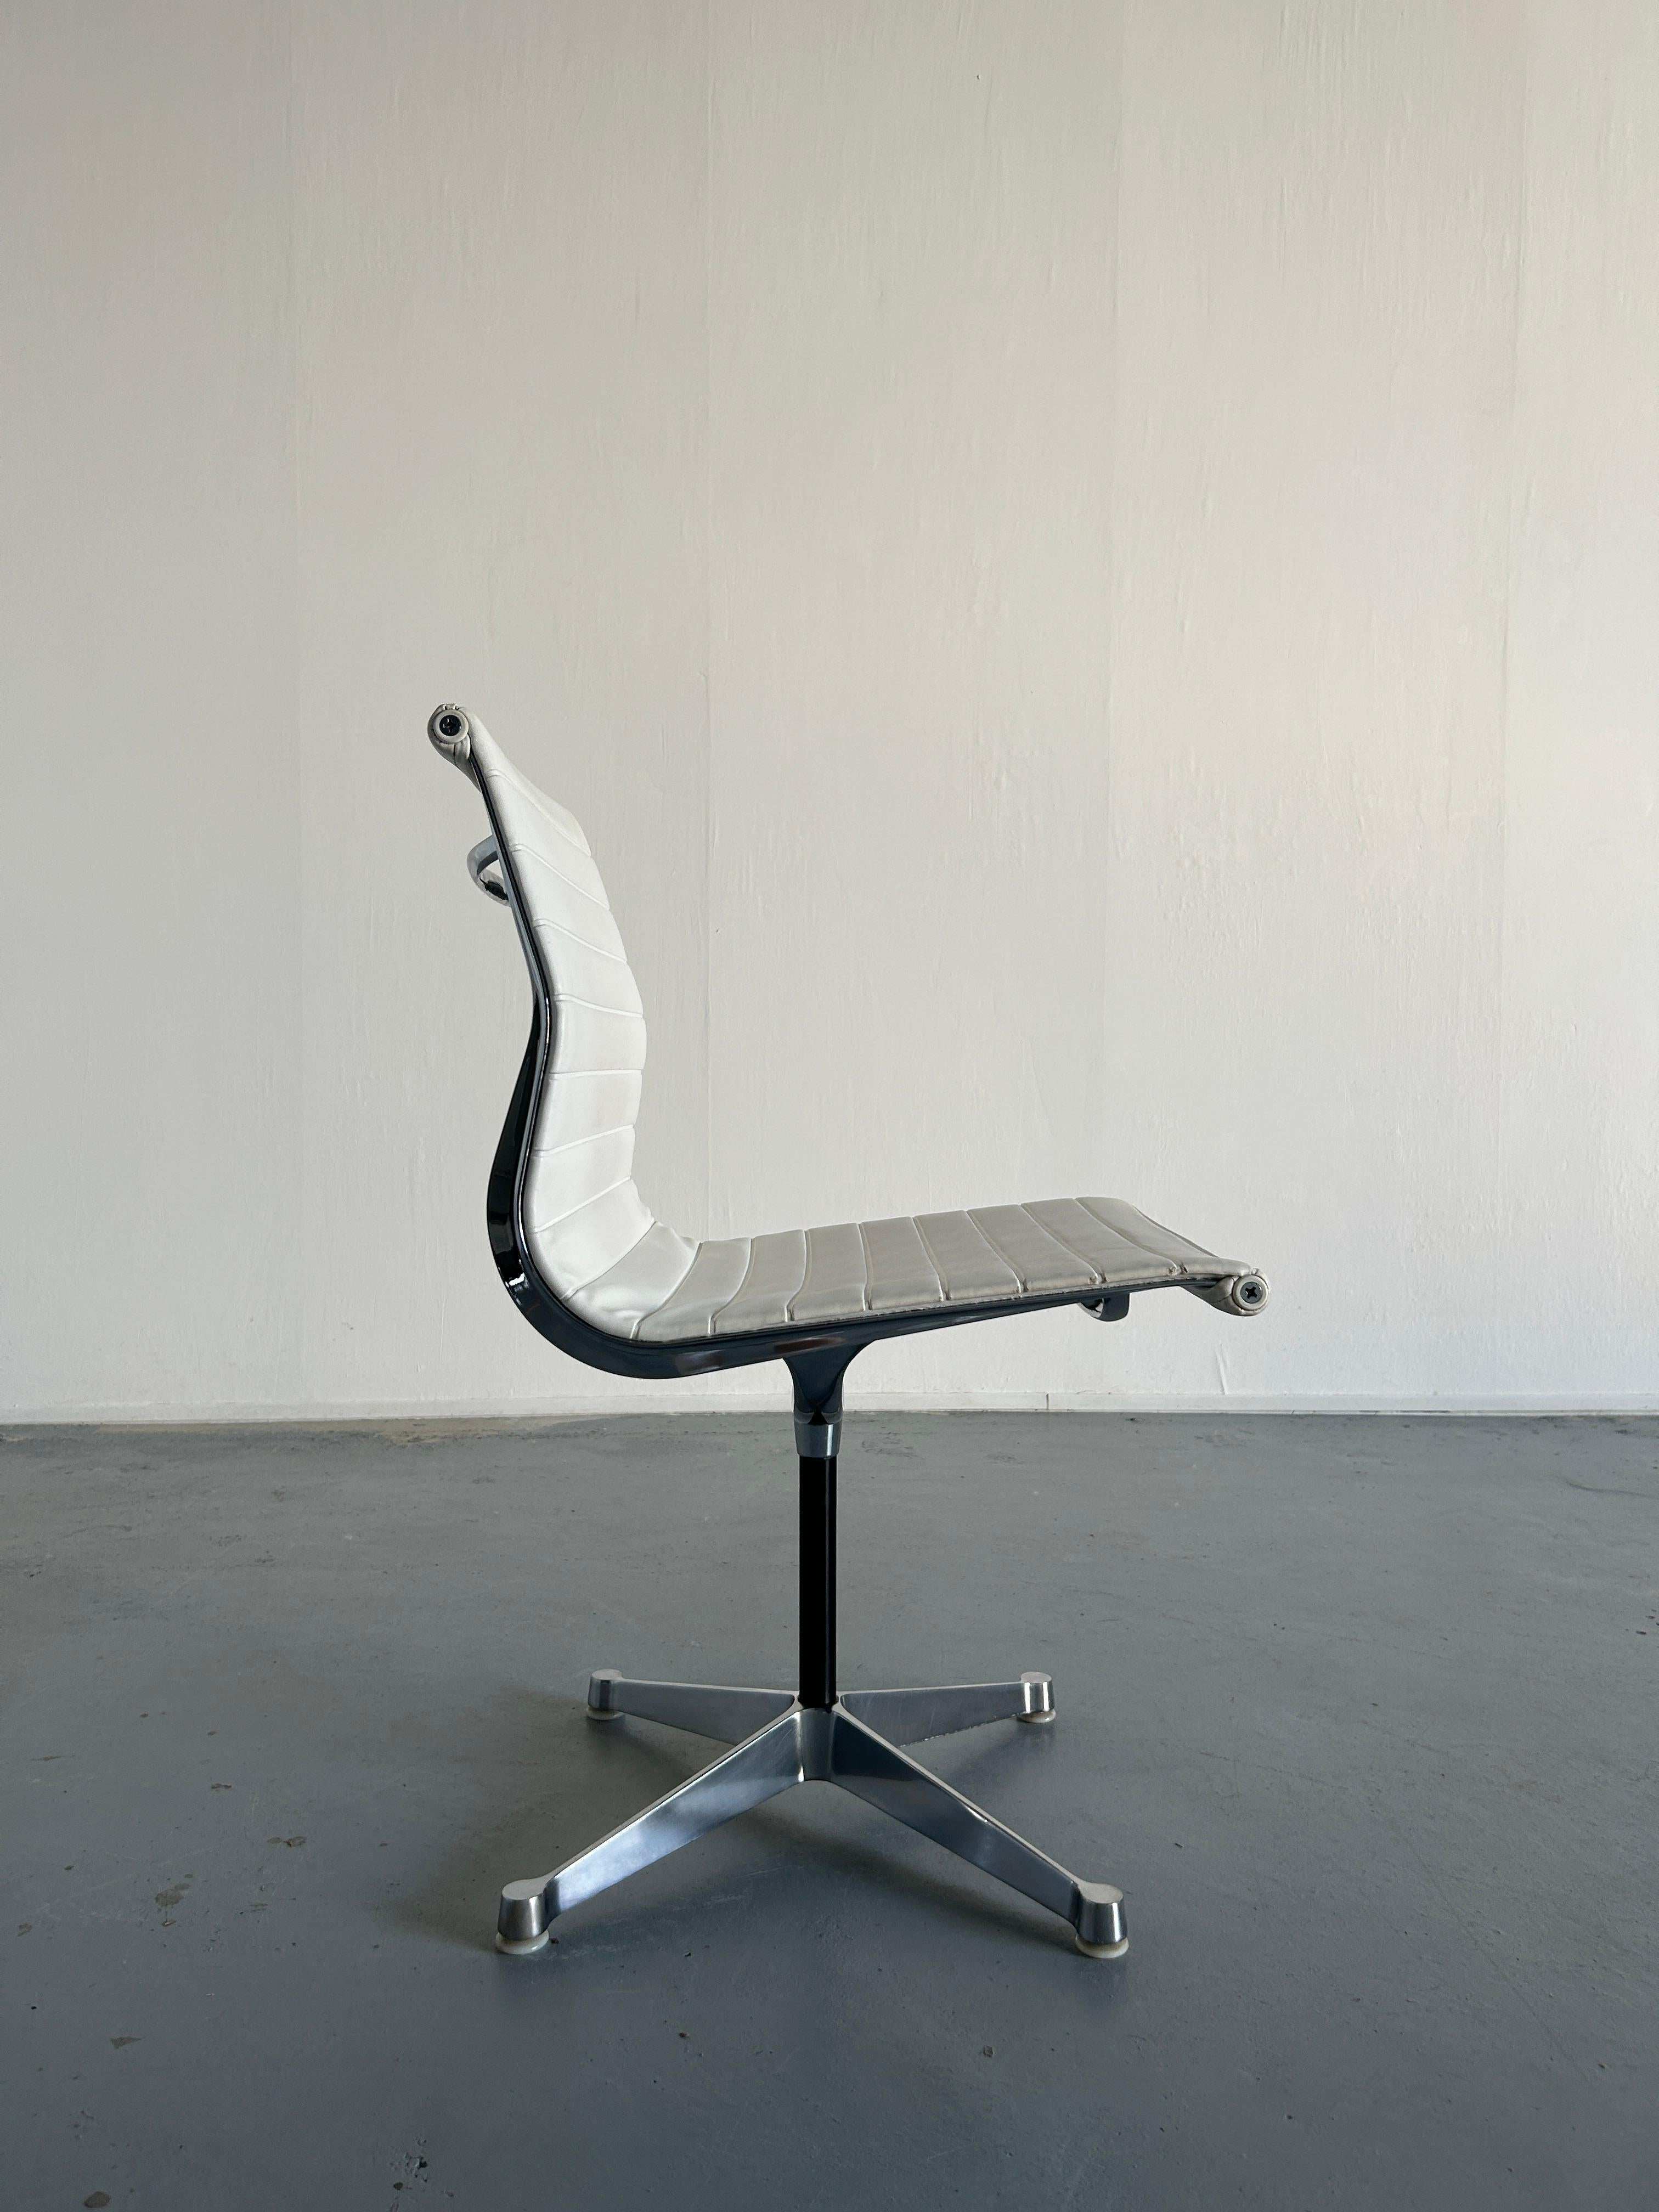 1 of 5 Original Vintage 'EA 107' Aluminium Desk Chairs by Charles & Ray Eames For Sale 3